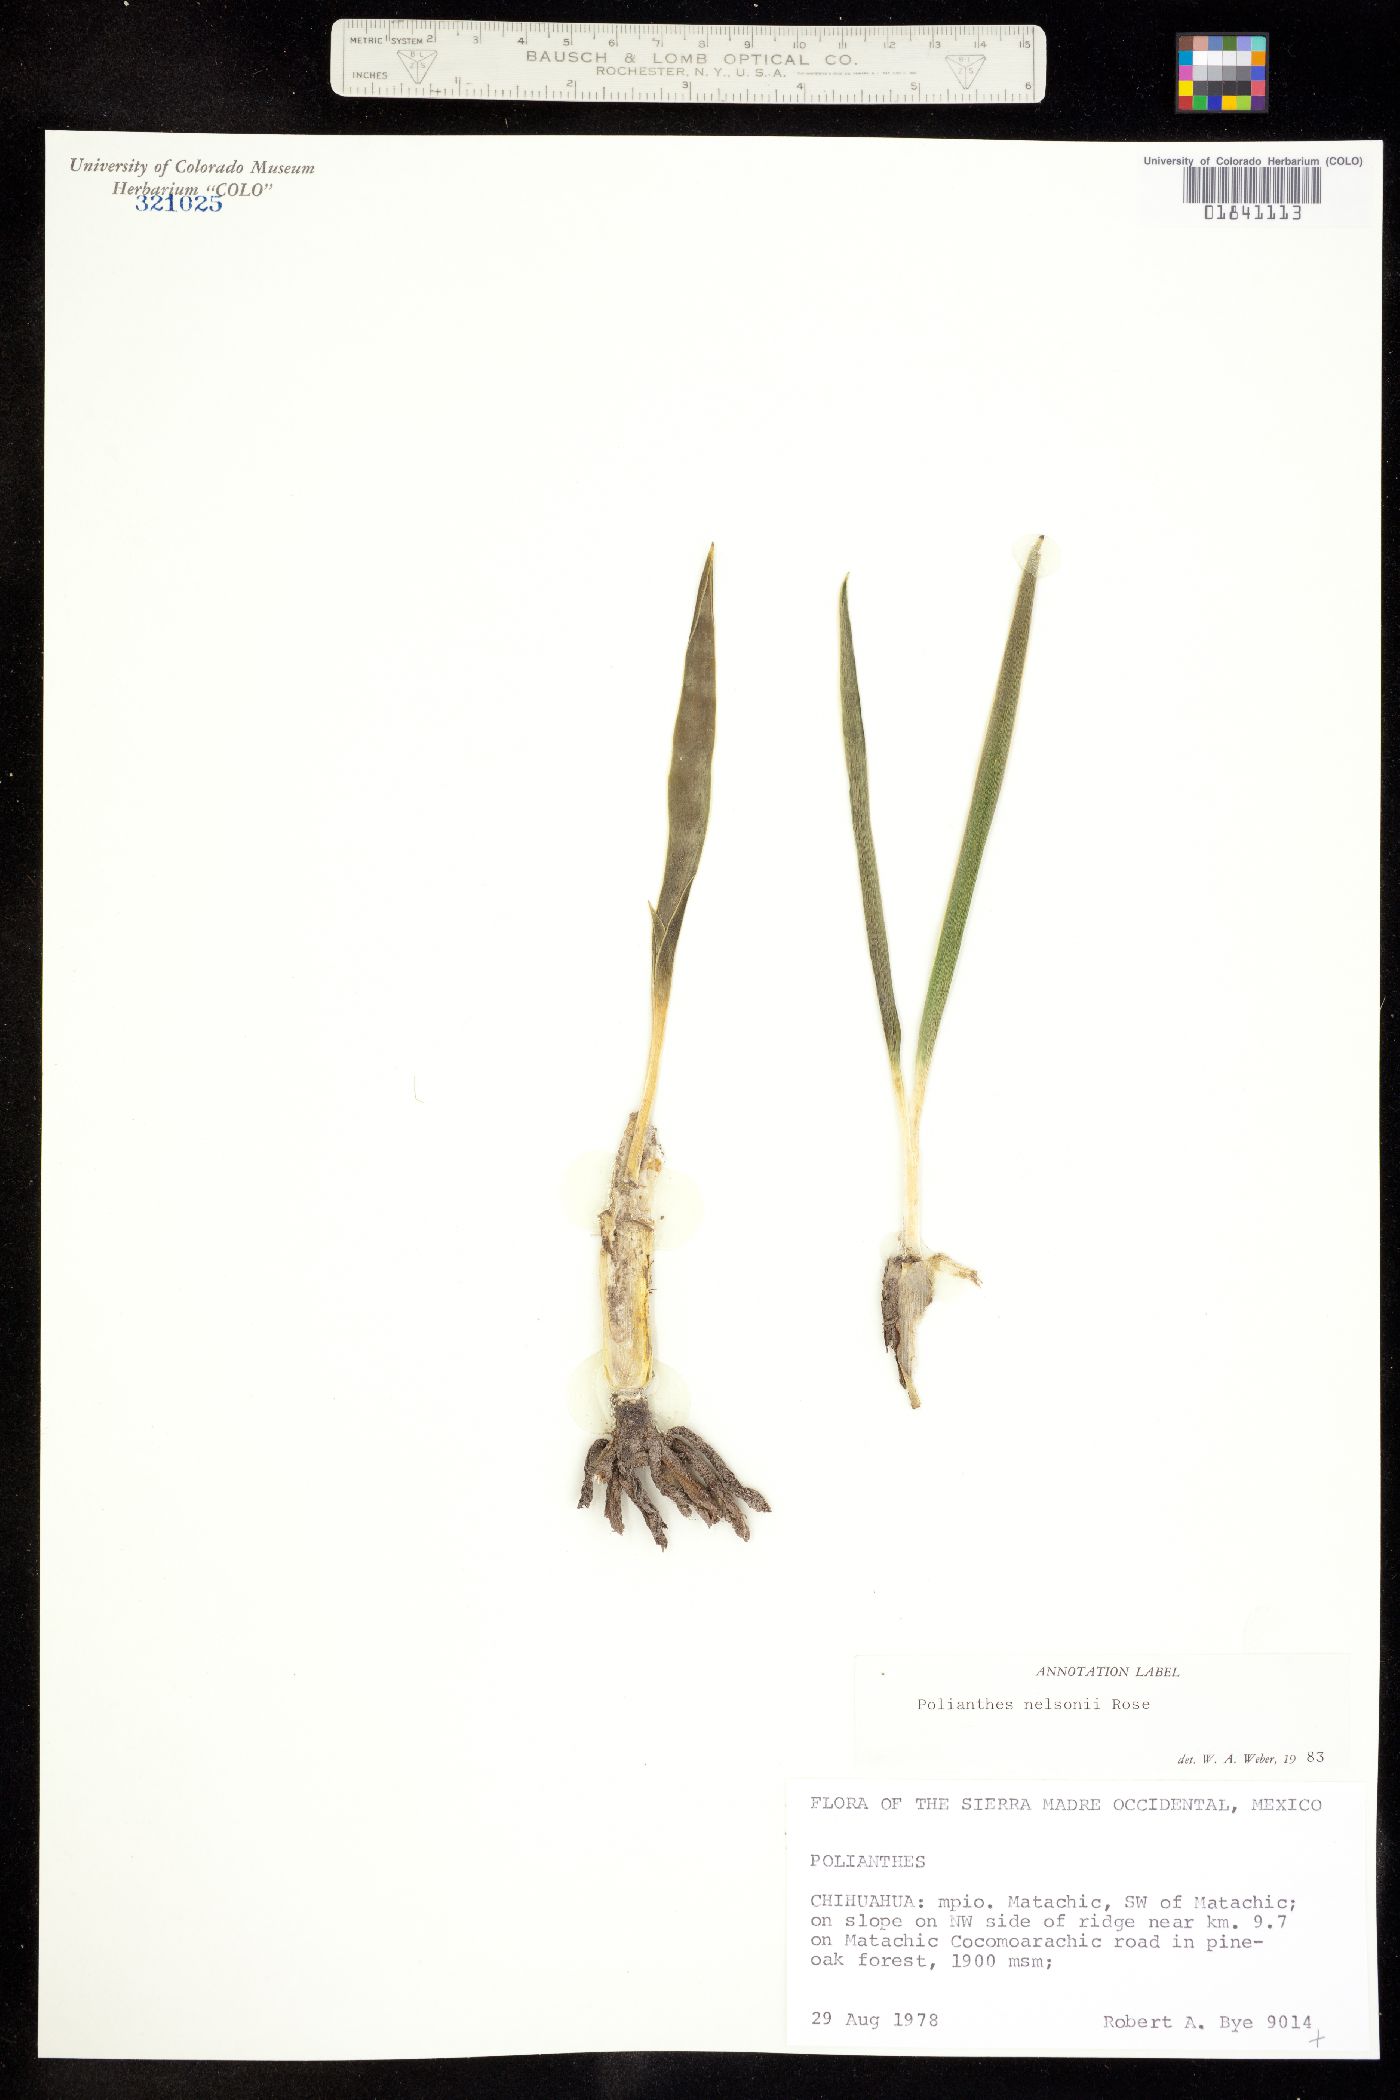 Polianthes nelsonii image